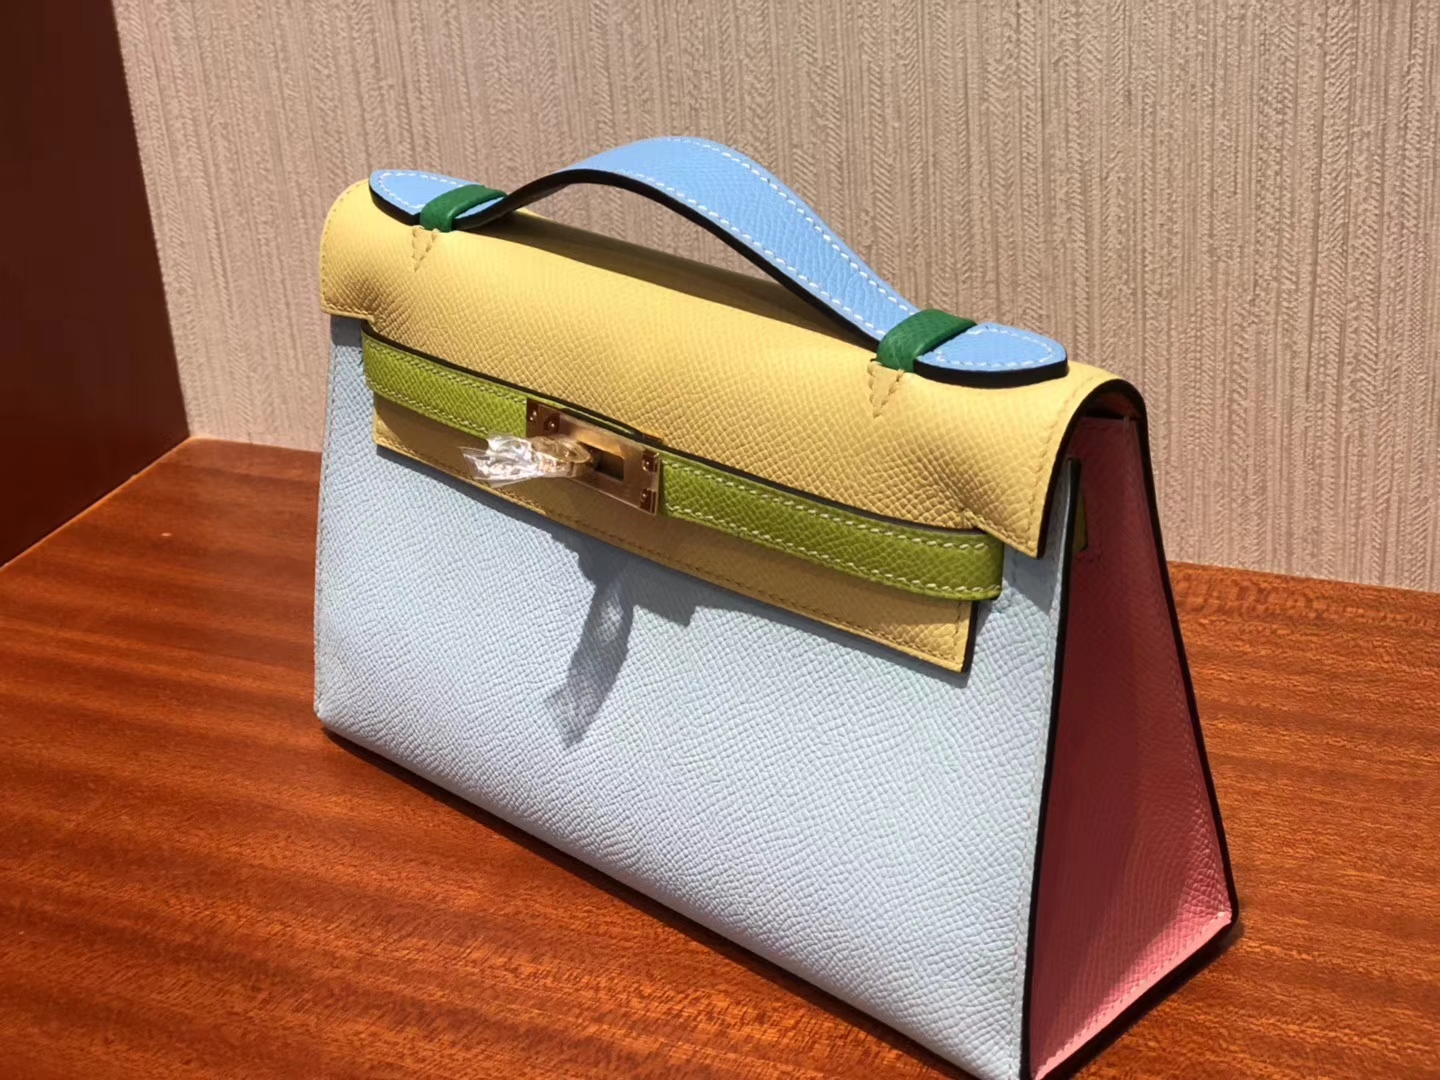 New Arrival Hermes Tri-color Epsom Calf Leather Minikelly Clutch Bag Gold Hardware